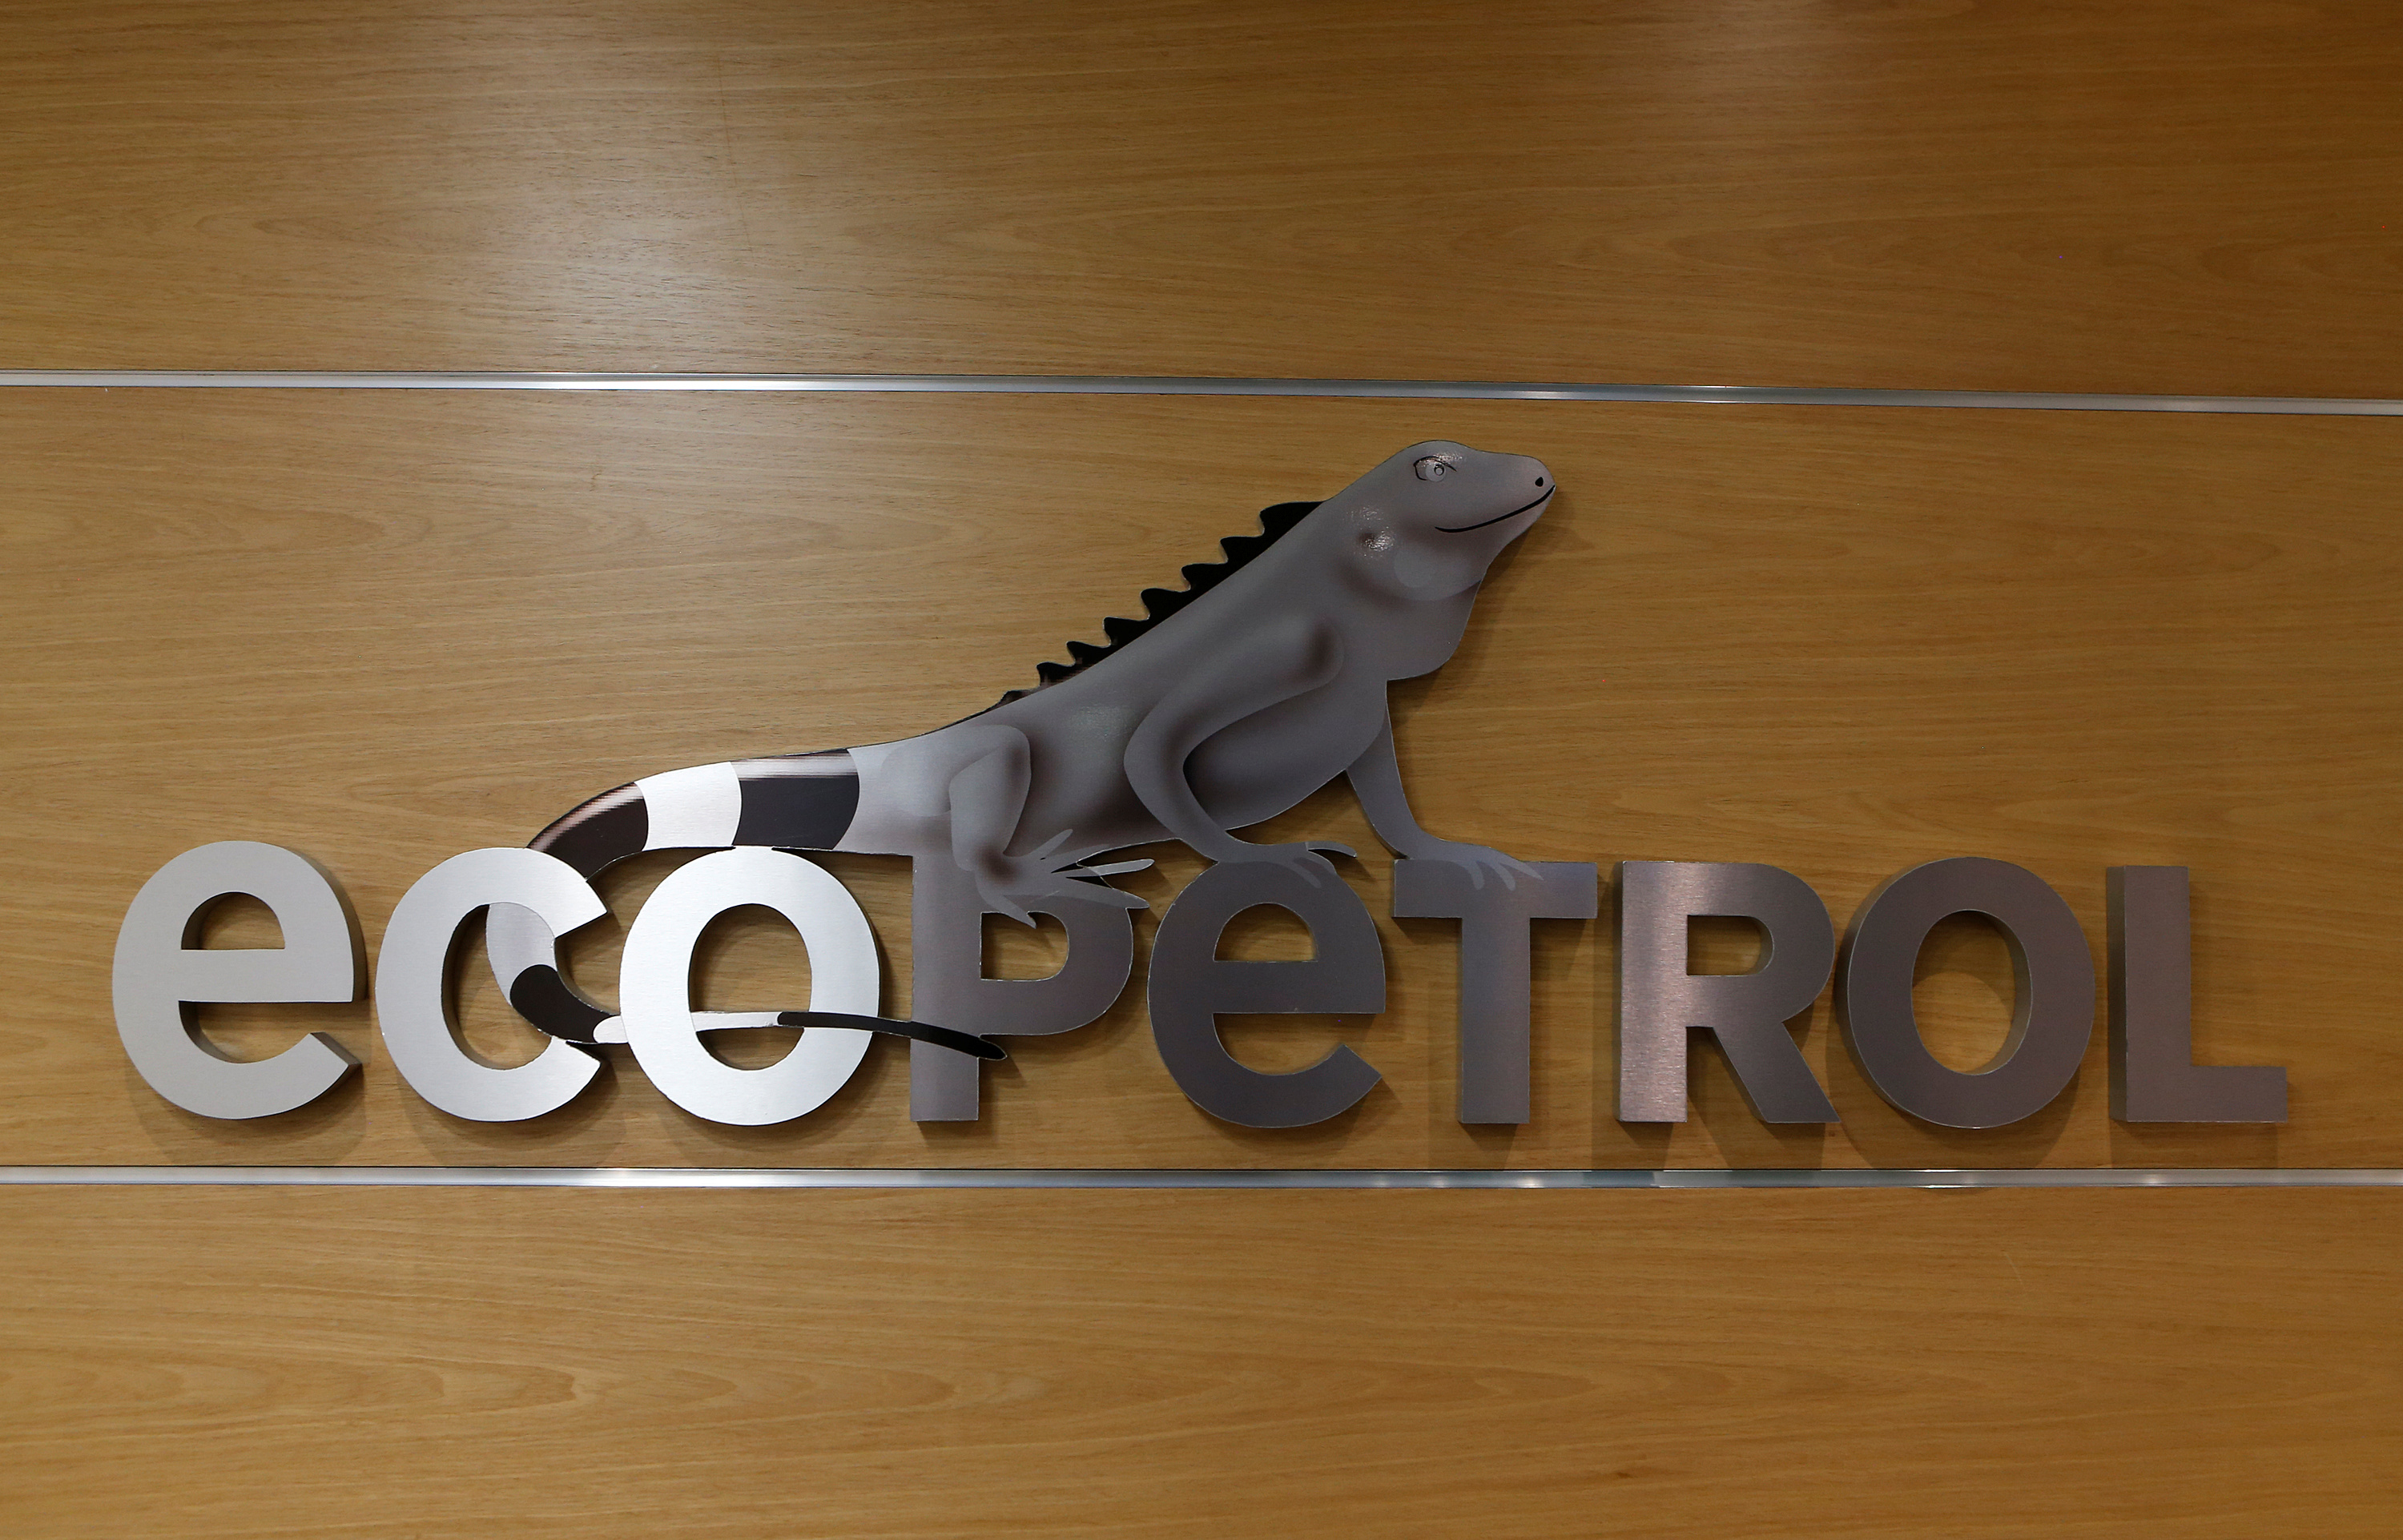 The logo of Ecopetrol is pictured at its headquarters in Bogota